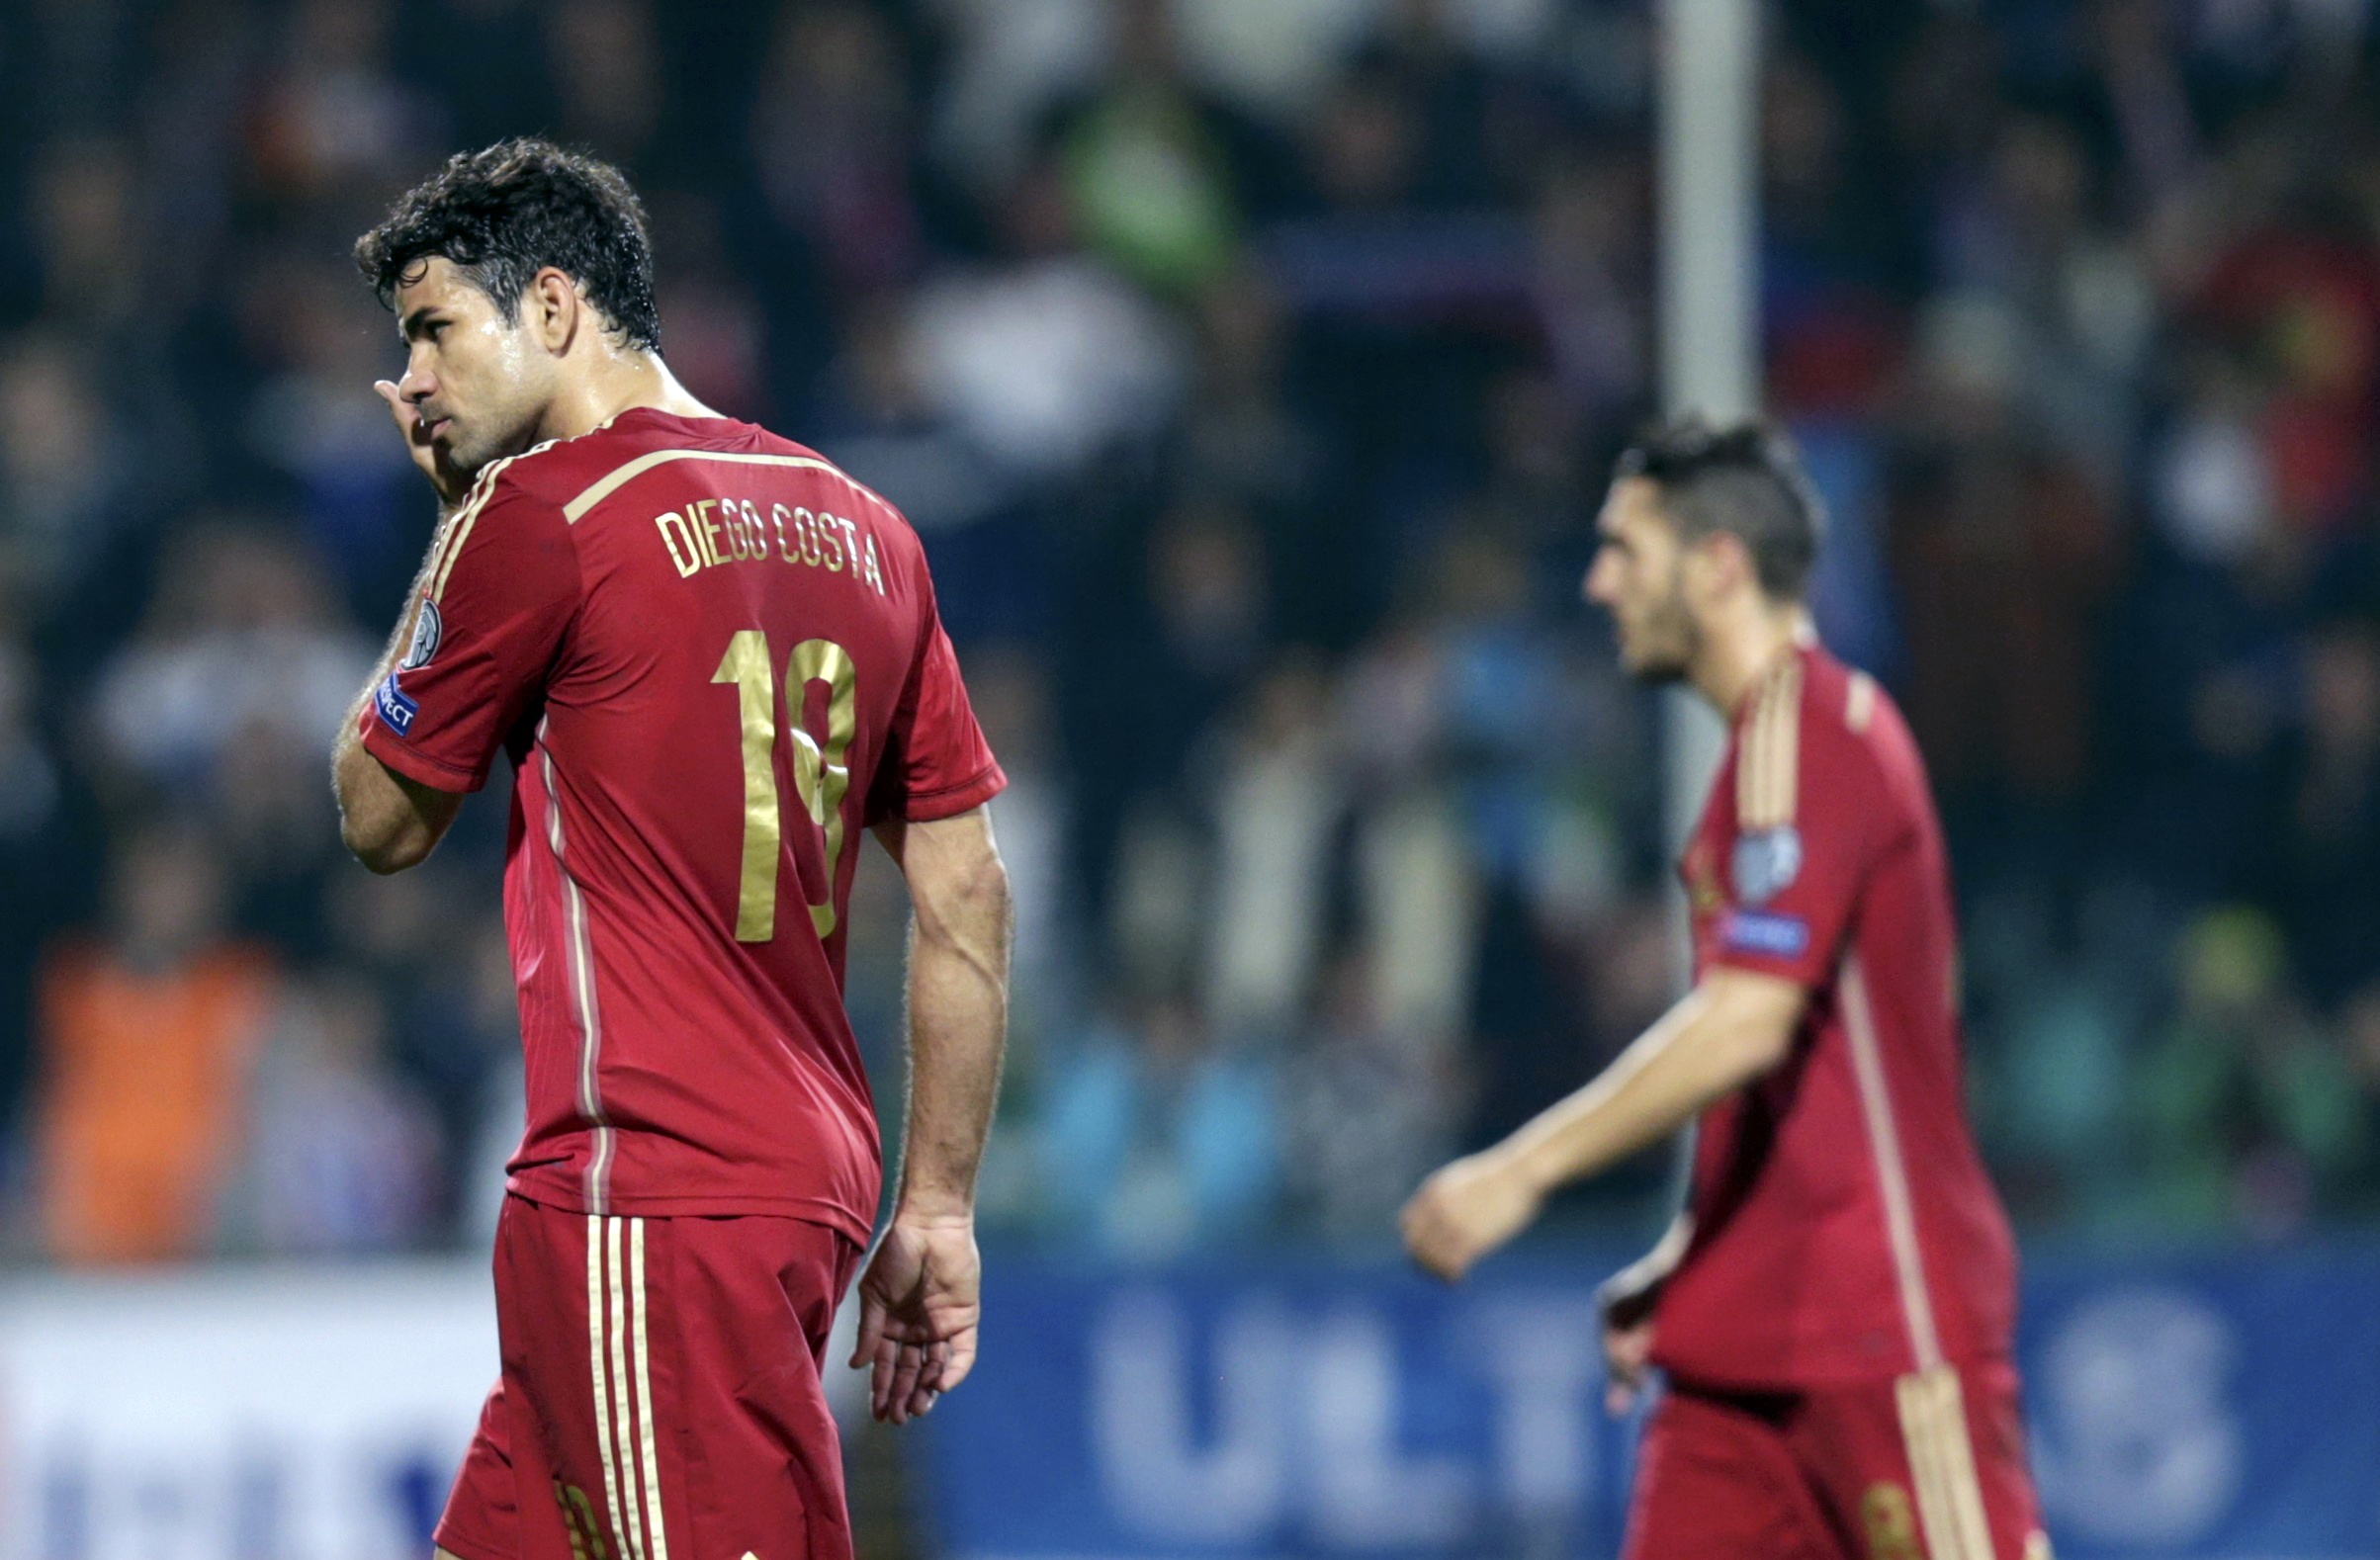 Spain not on downward spiral, says Del Bosque after defeat